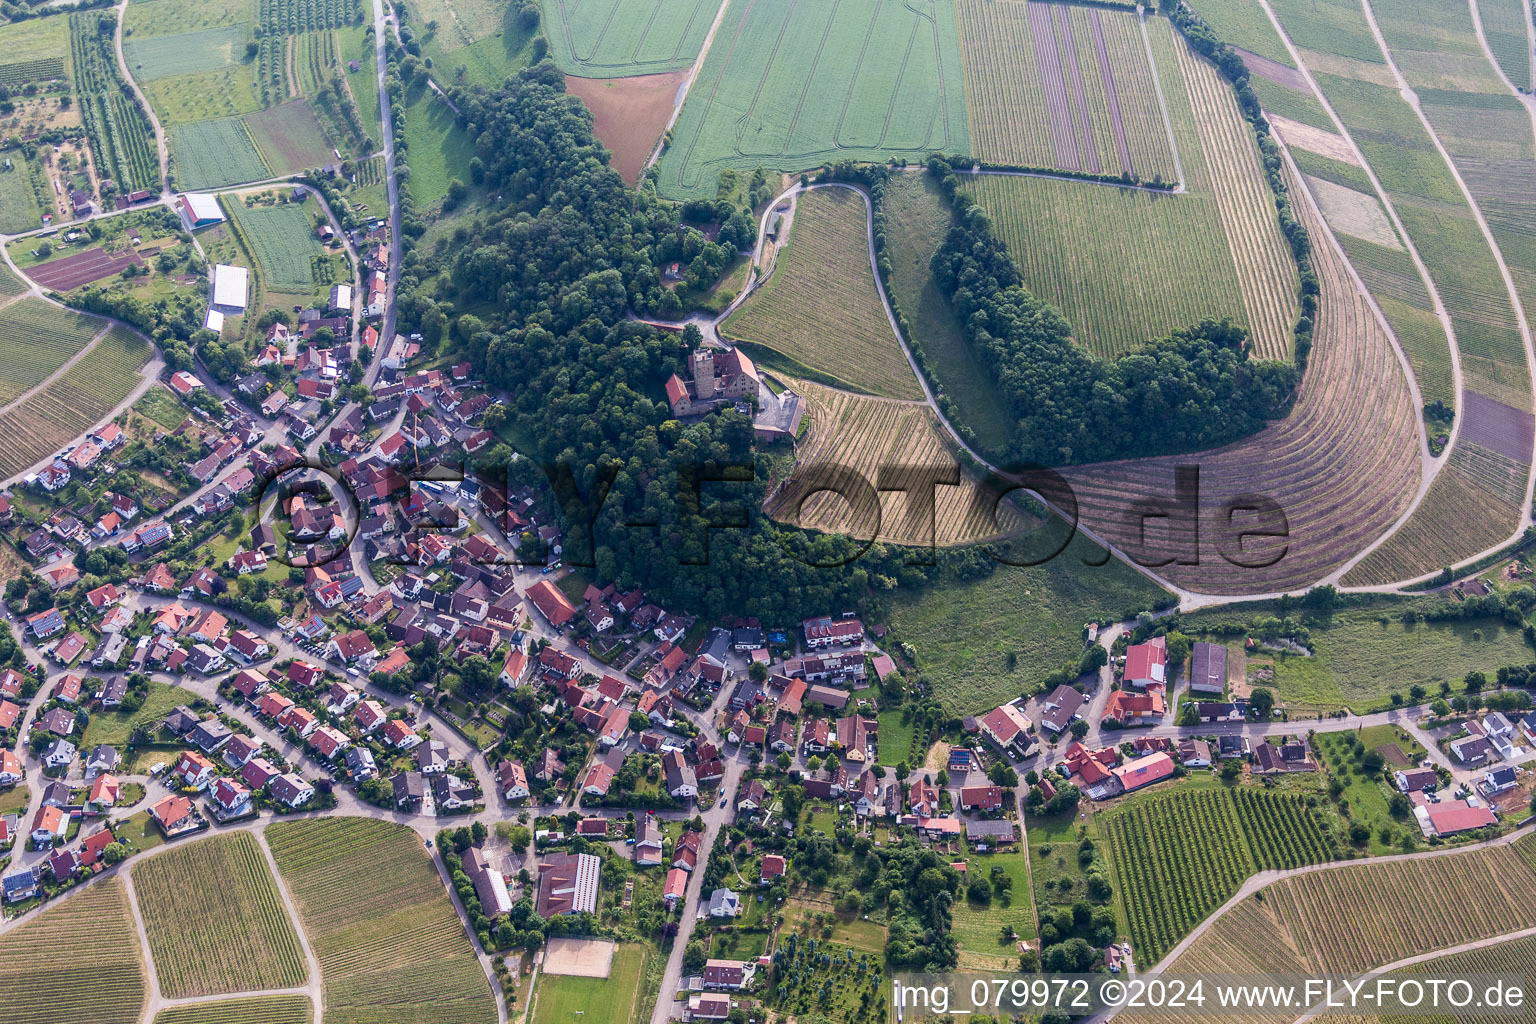 Aerial view of Village - view on the edge of agricultural fields and farmland in the district Neipperg in Brackenheim in the state Baden-Wurttemberg, Germany